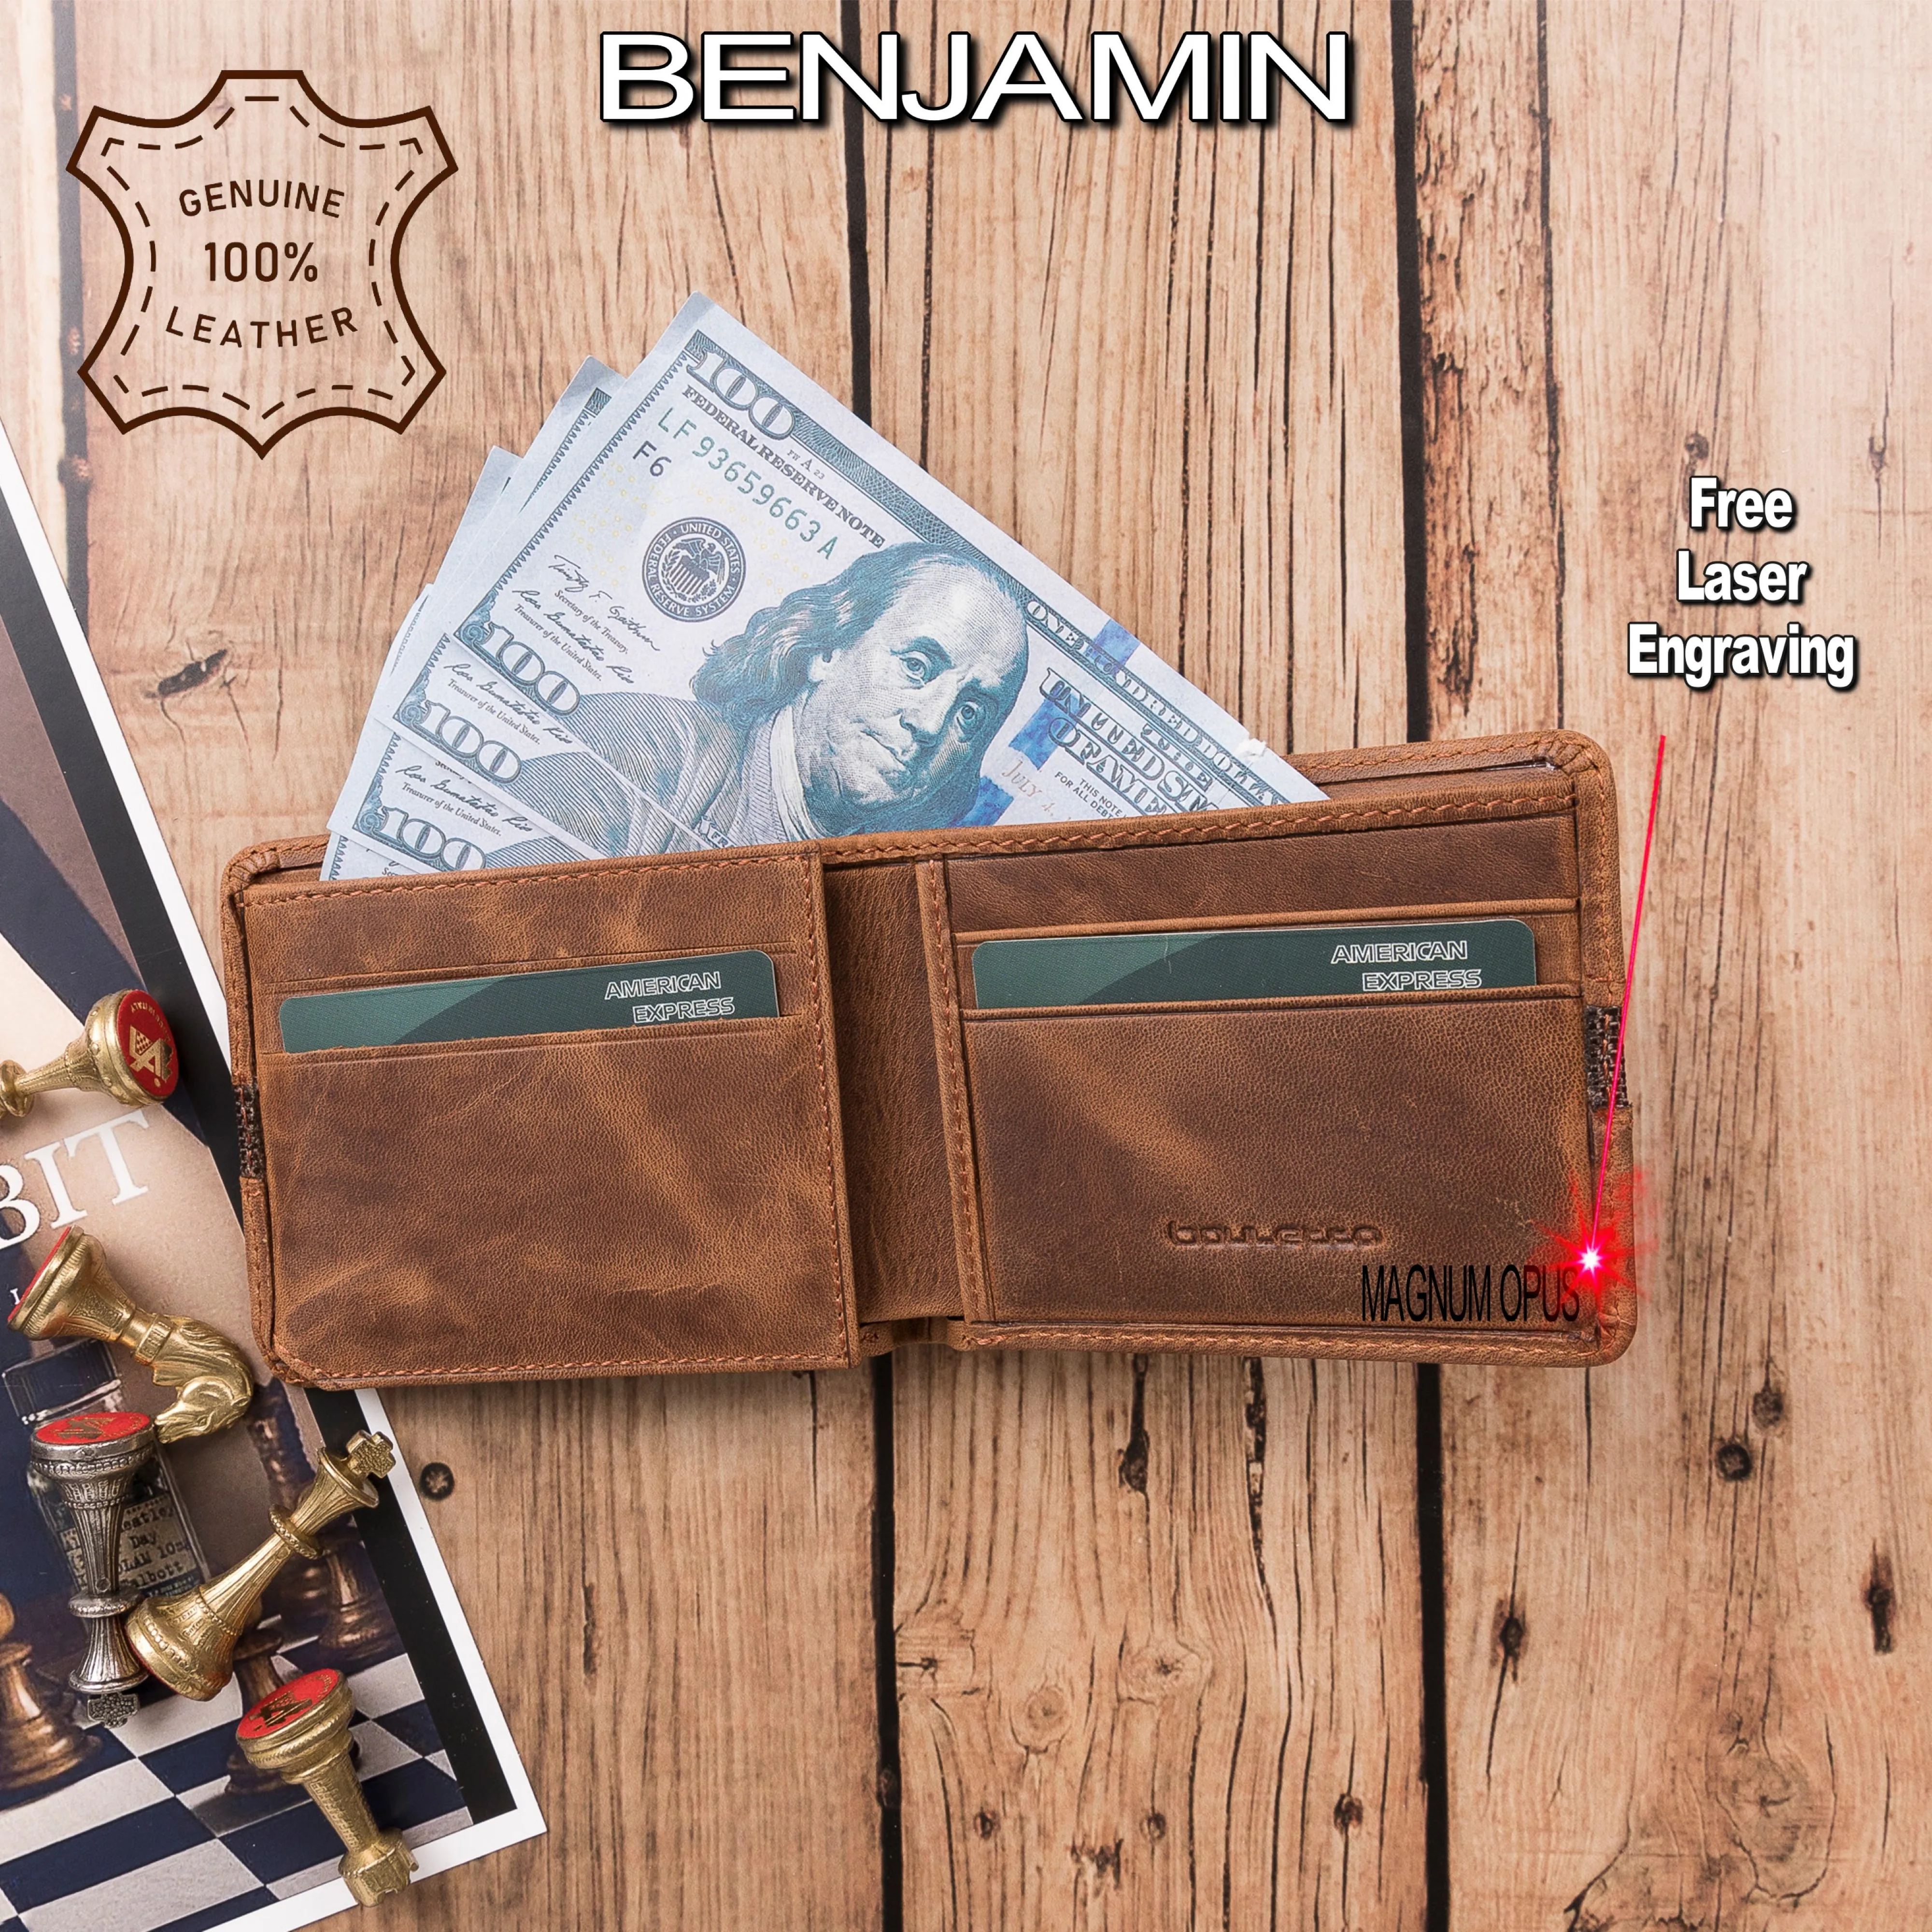 Handmade Genuine Leather Credit Card, Cash and ID Card Holder Wallet Stores Up To 7 Cards for Jacket Inner Pocket Elegant Style